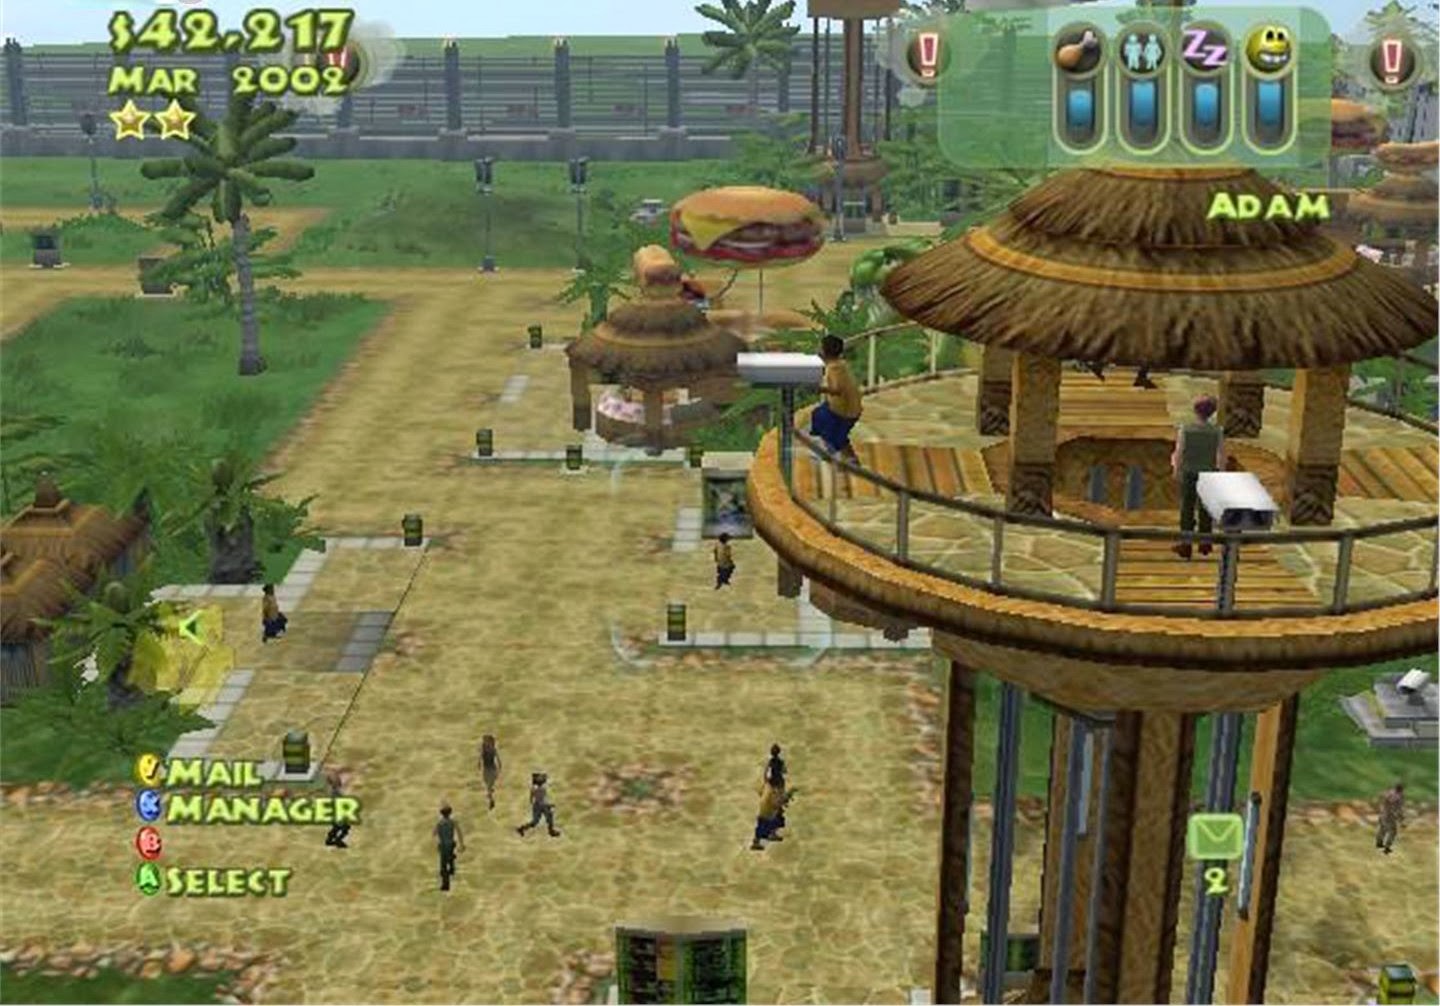 Download Jurassic Park The Game Pc Full Version